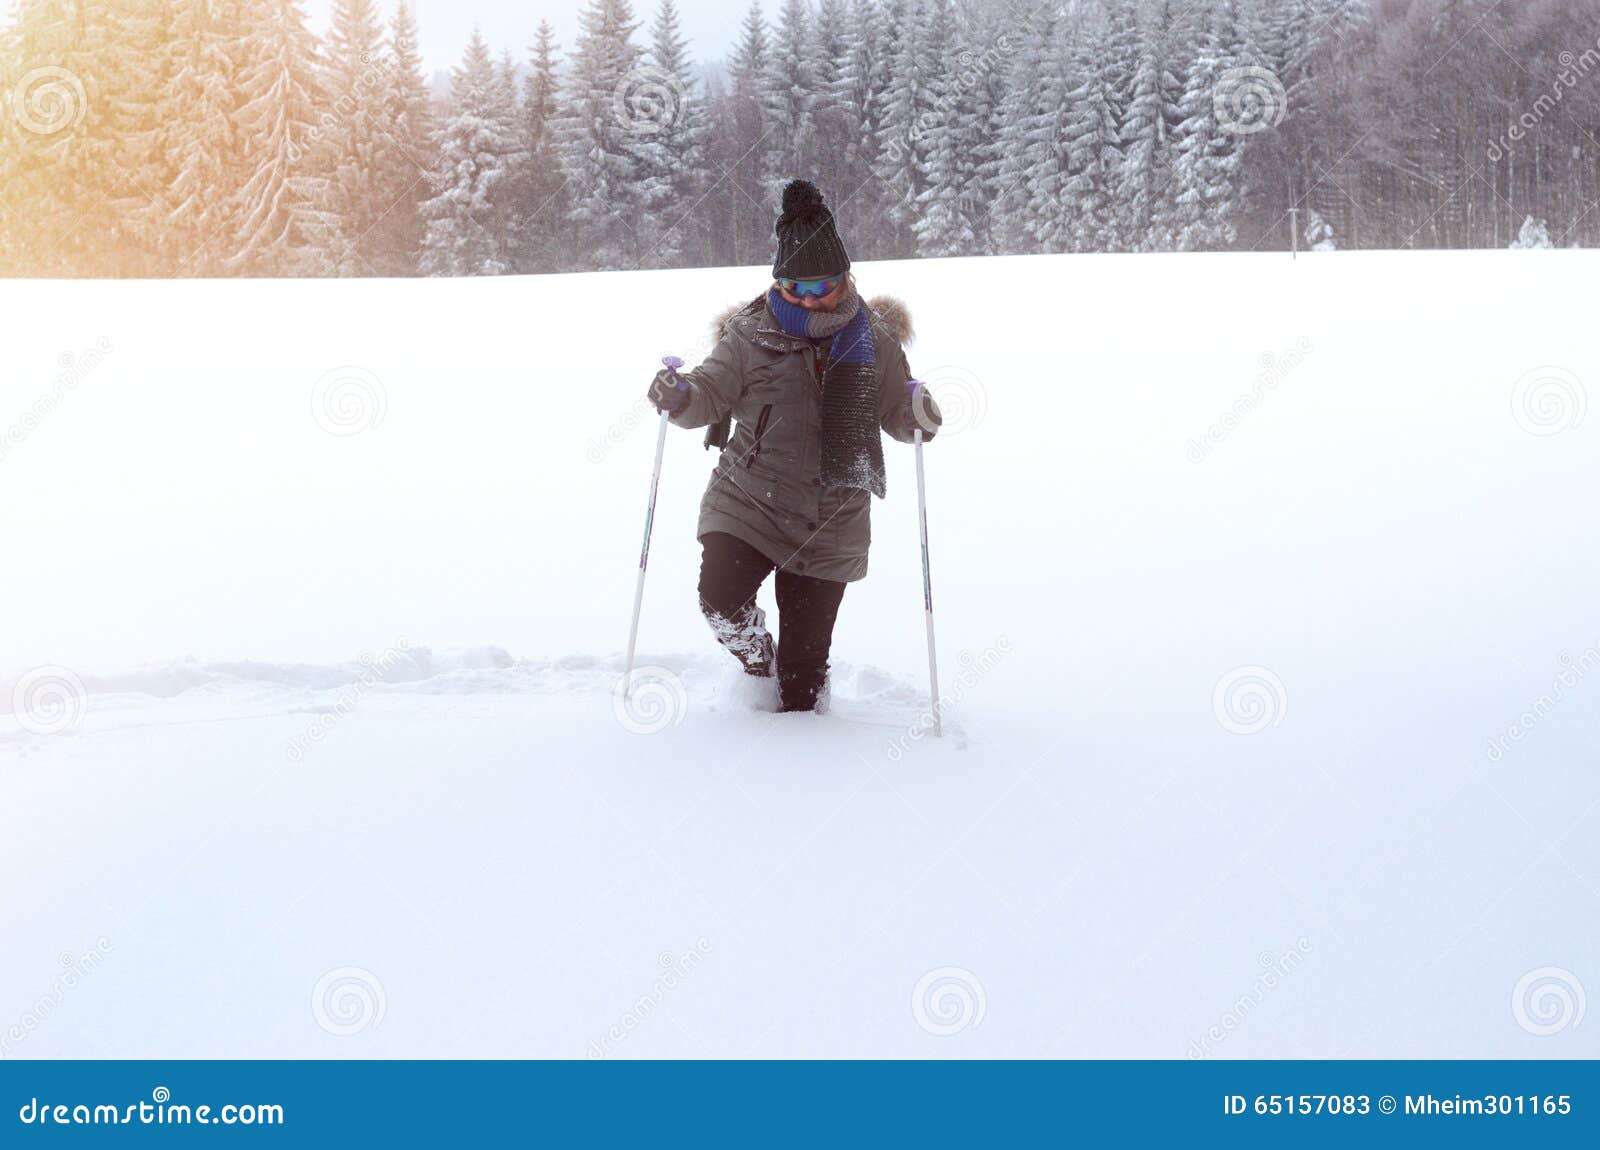 Front View Of A Person Walking Through Deep Snow Stock Image - 